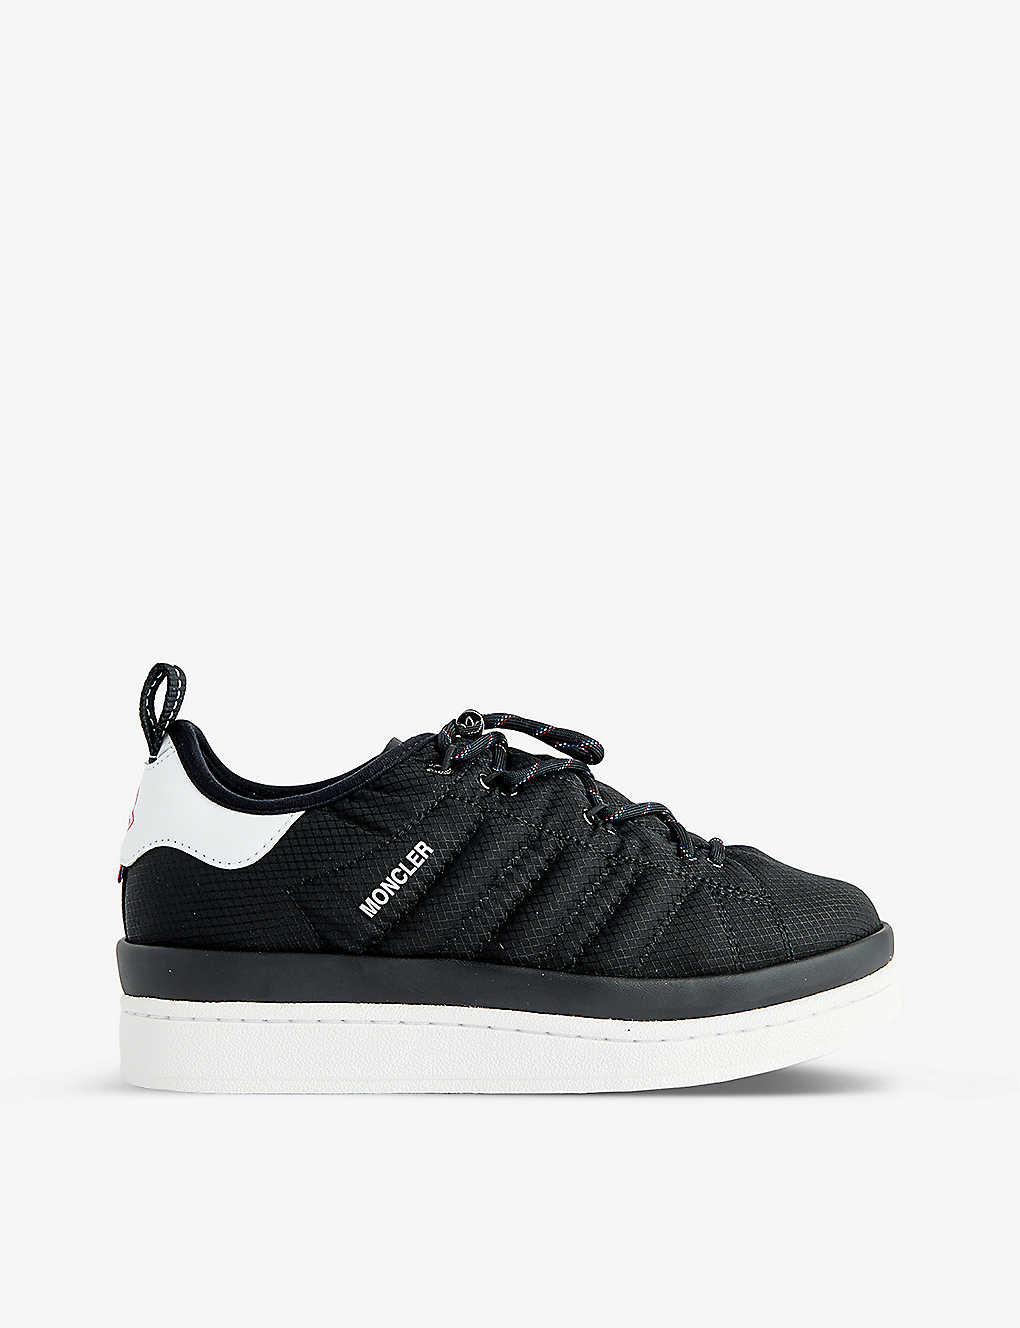 Moncler Genius Moncler X Adidas Campus Leather Sneakers In 999